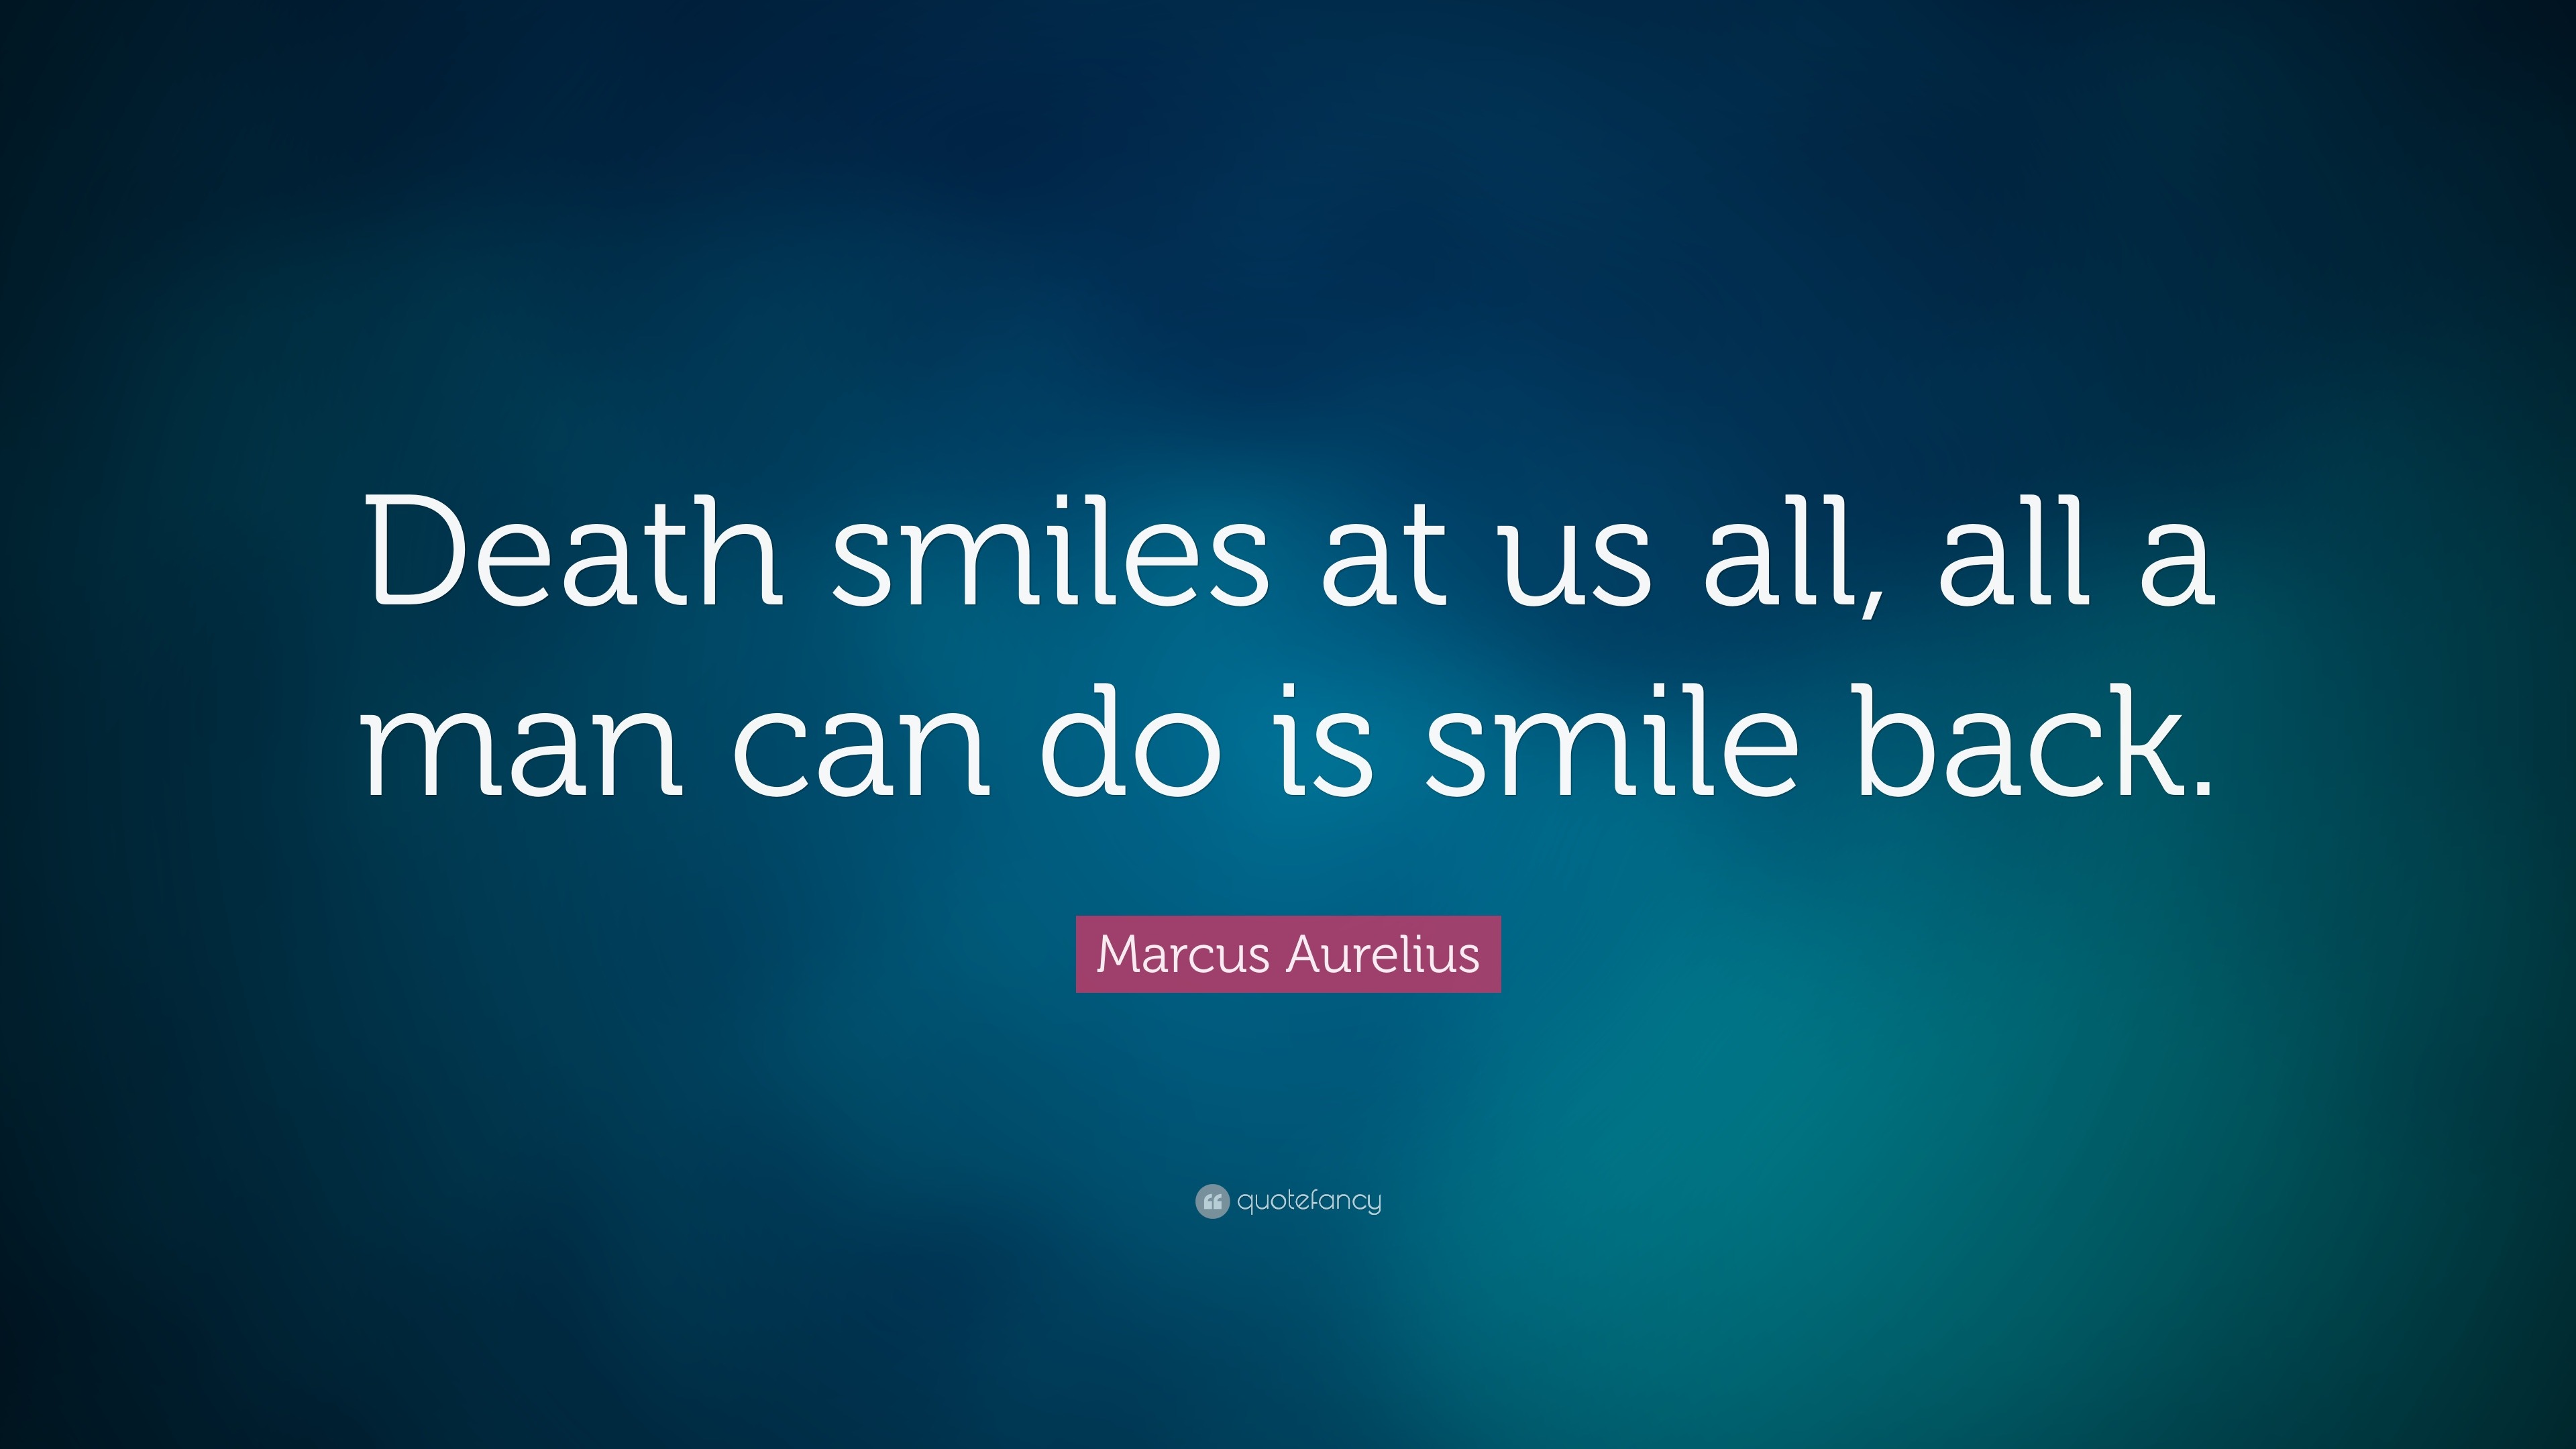 Marcus Aurelius Quote: “Death smiles at us all, all a man can do is